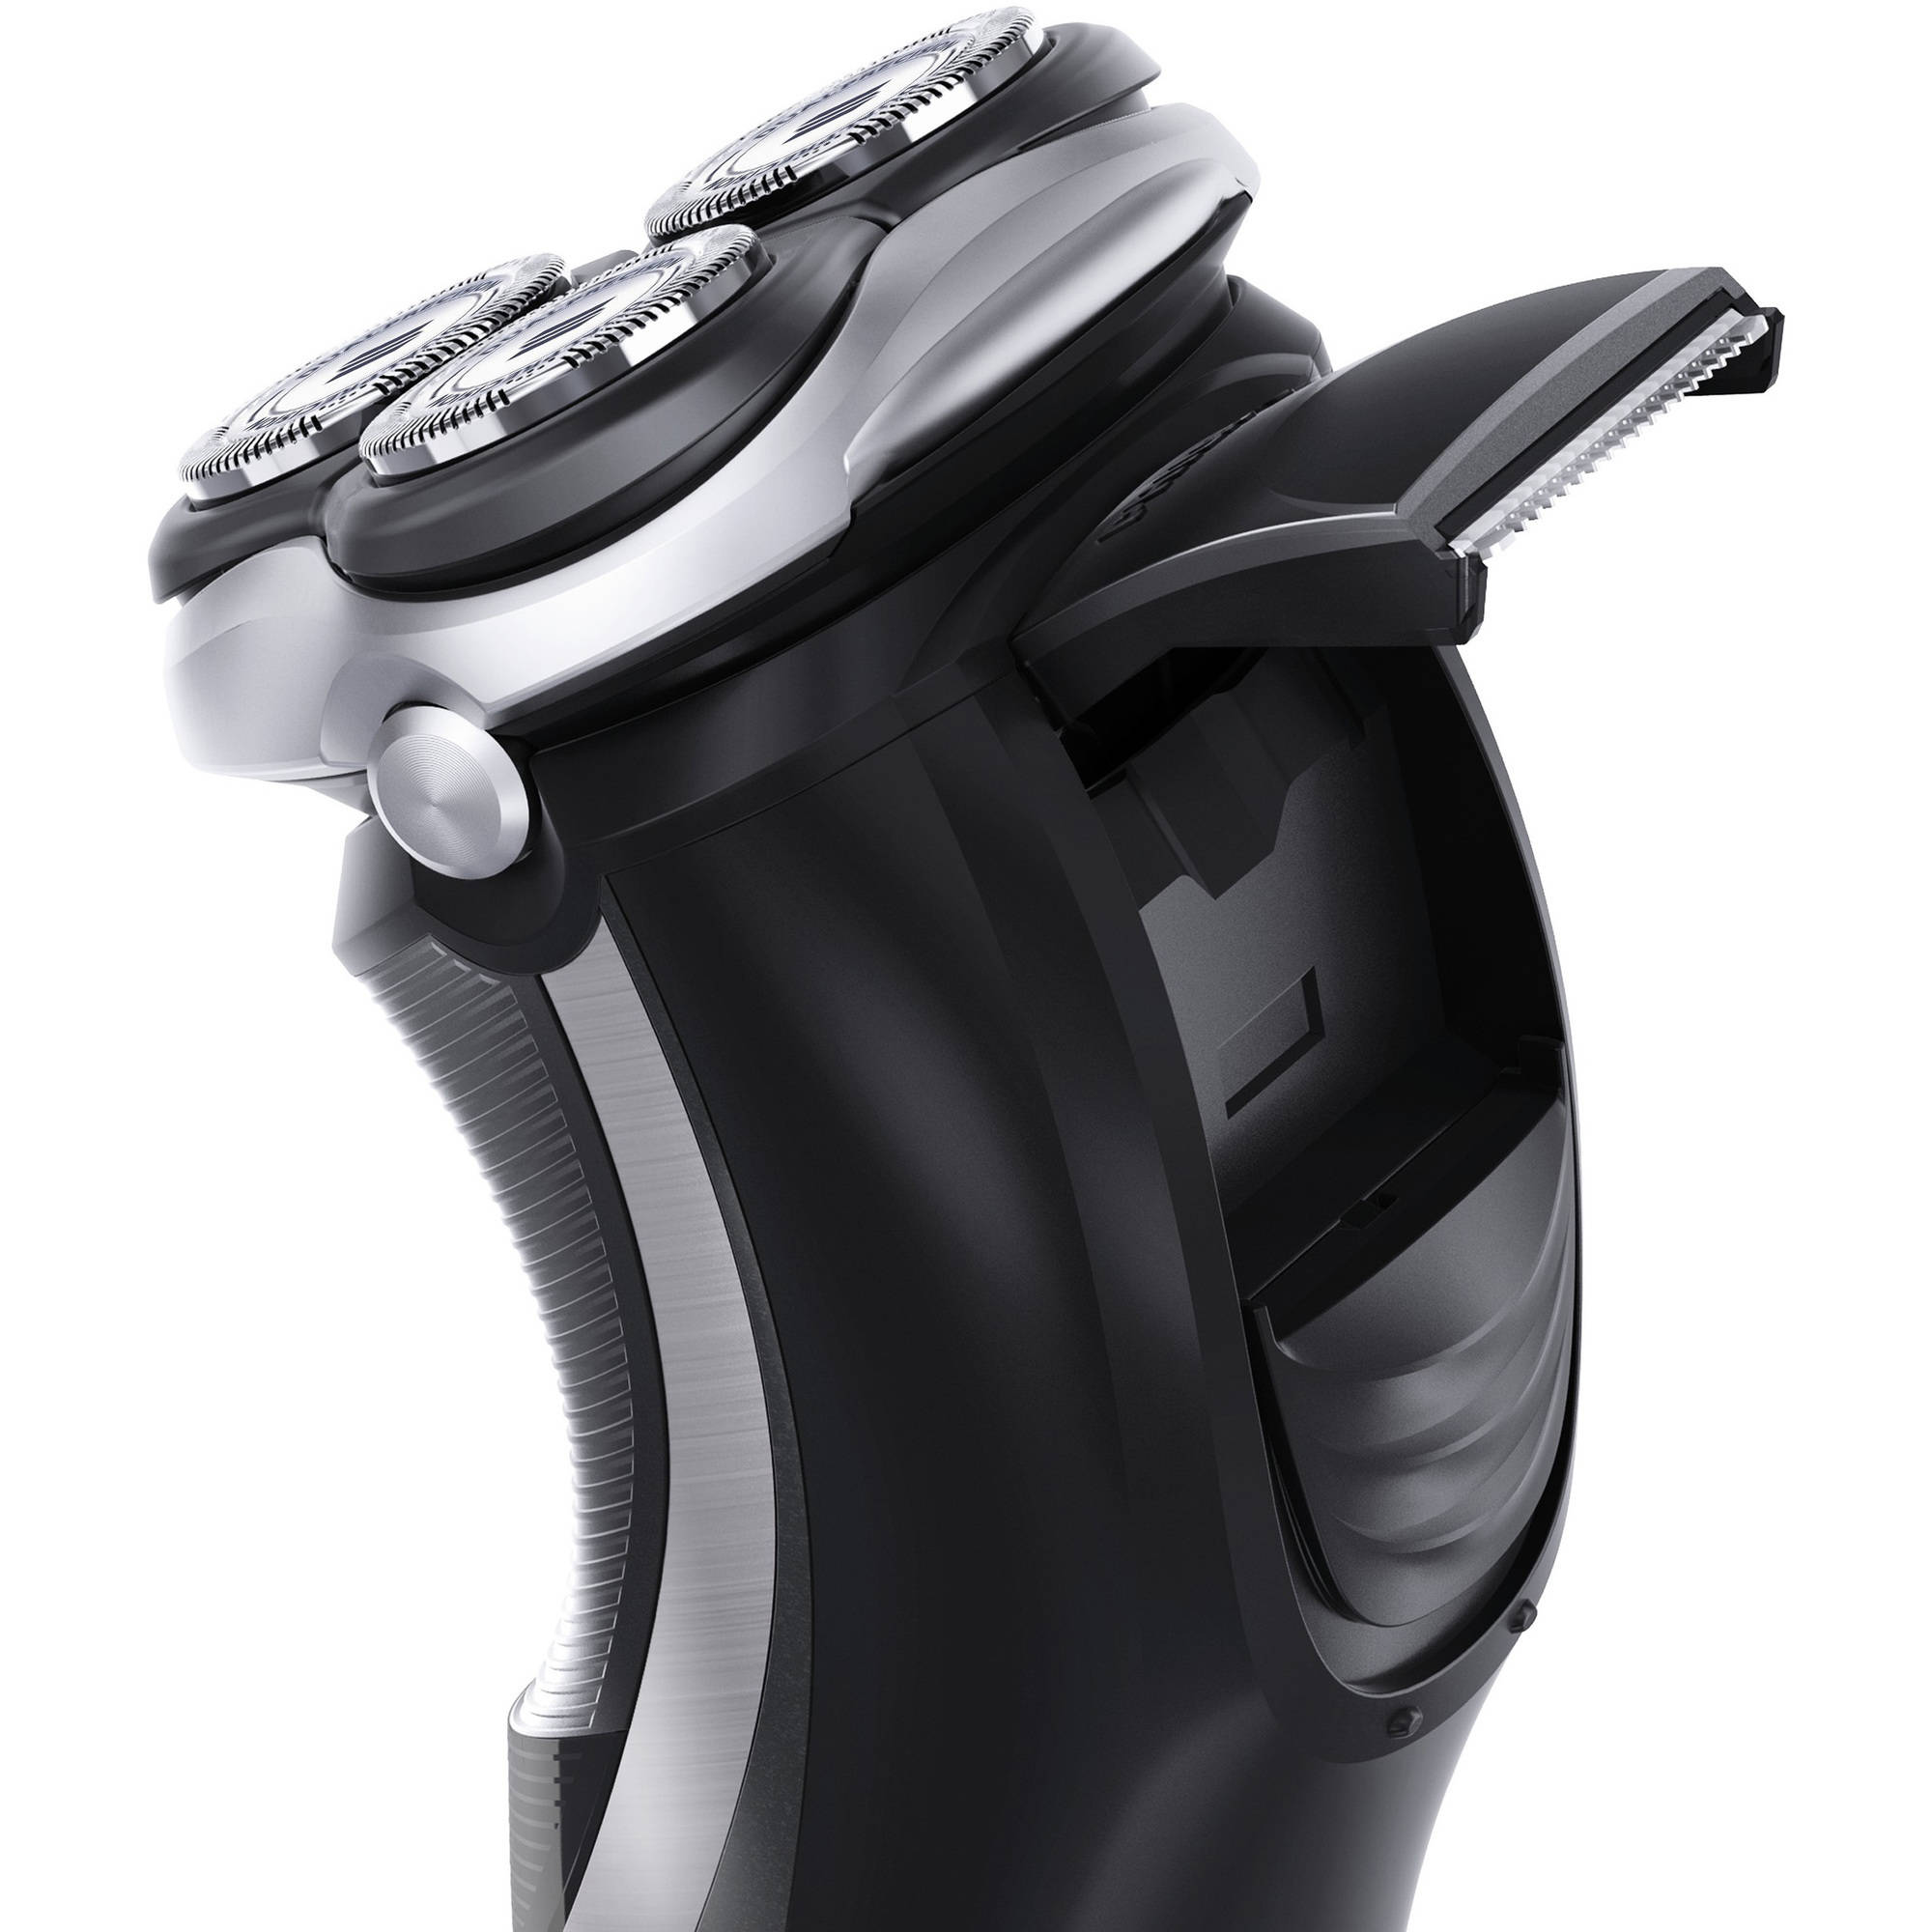 Philips Norelco  Shaver, 1 ea - image 3 of 5